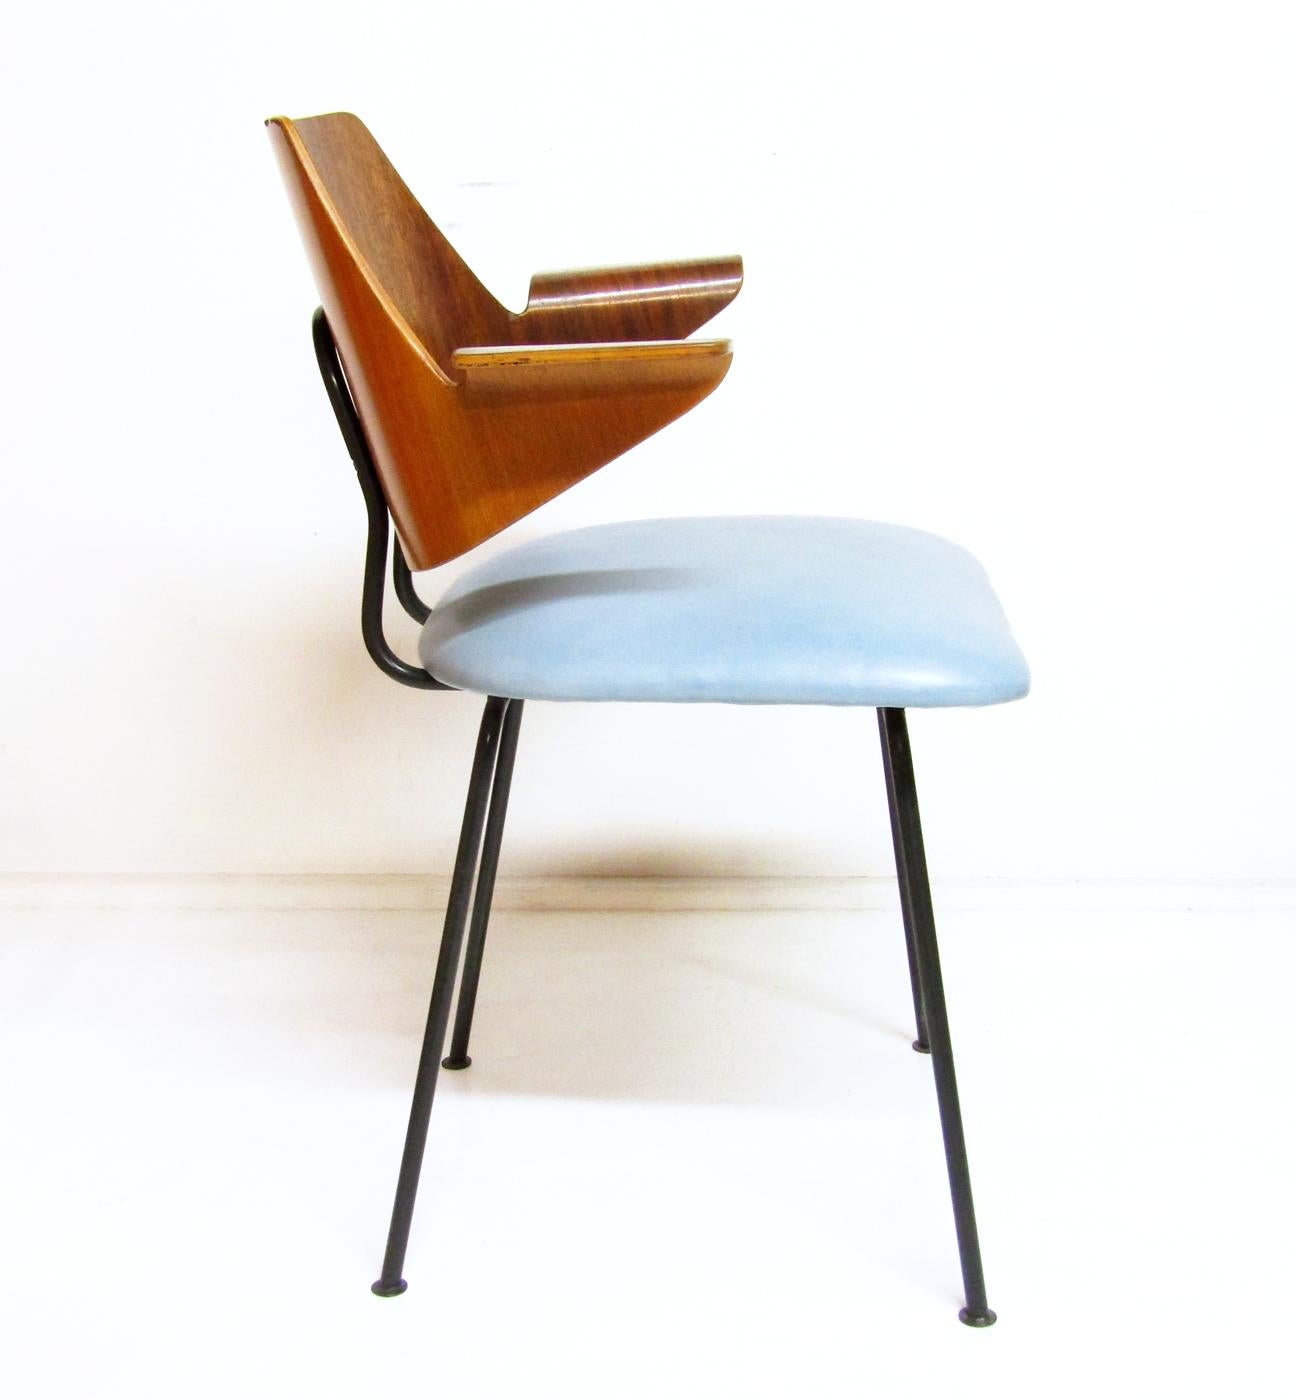 1950s Modernist Desk & Chair Set in Walnut & Leather by Robin Day for Hille 3